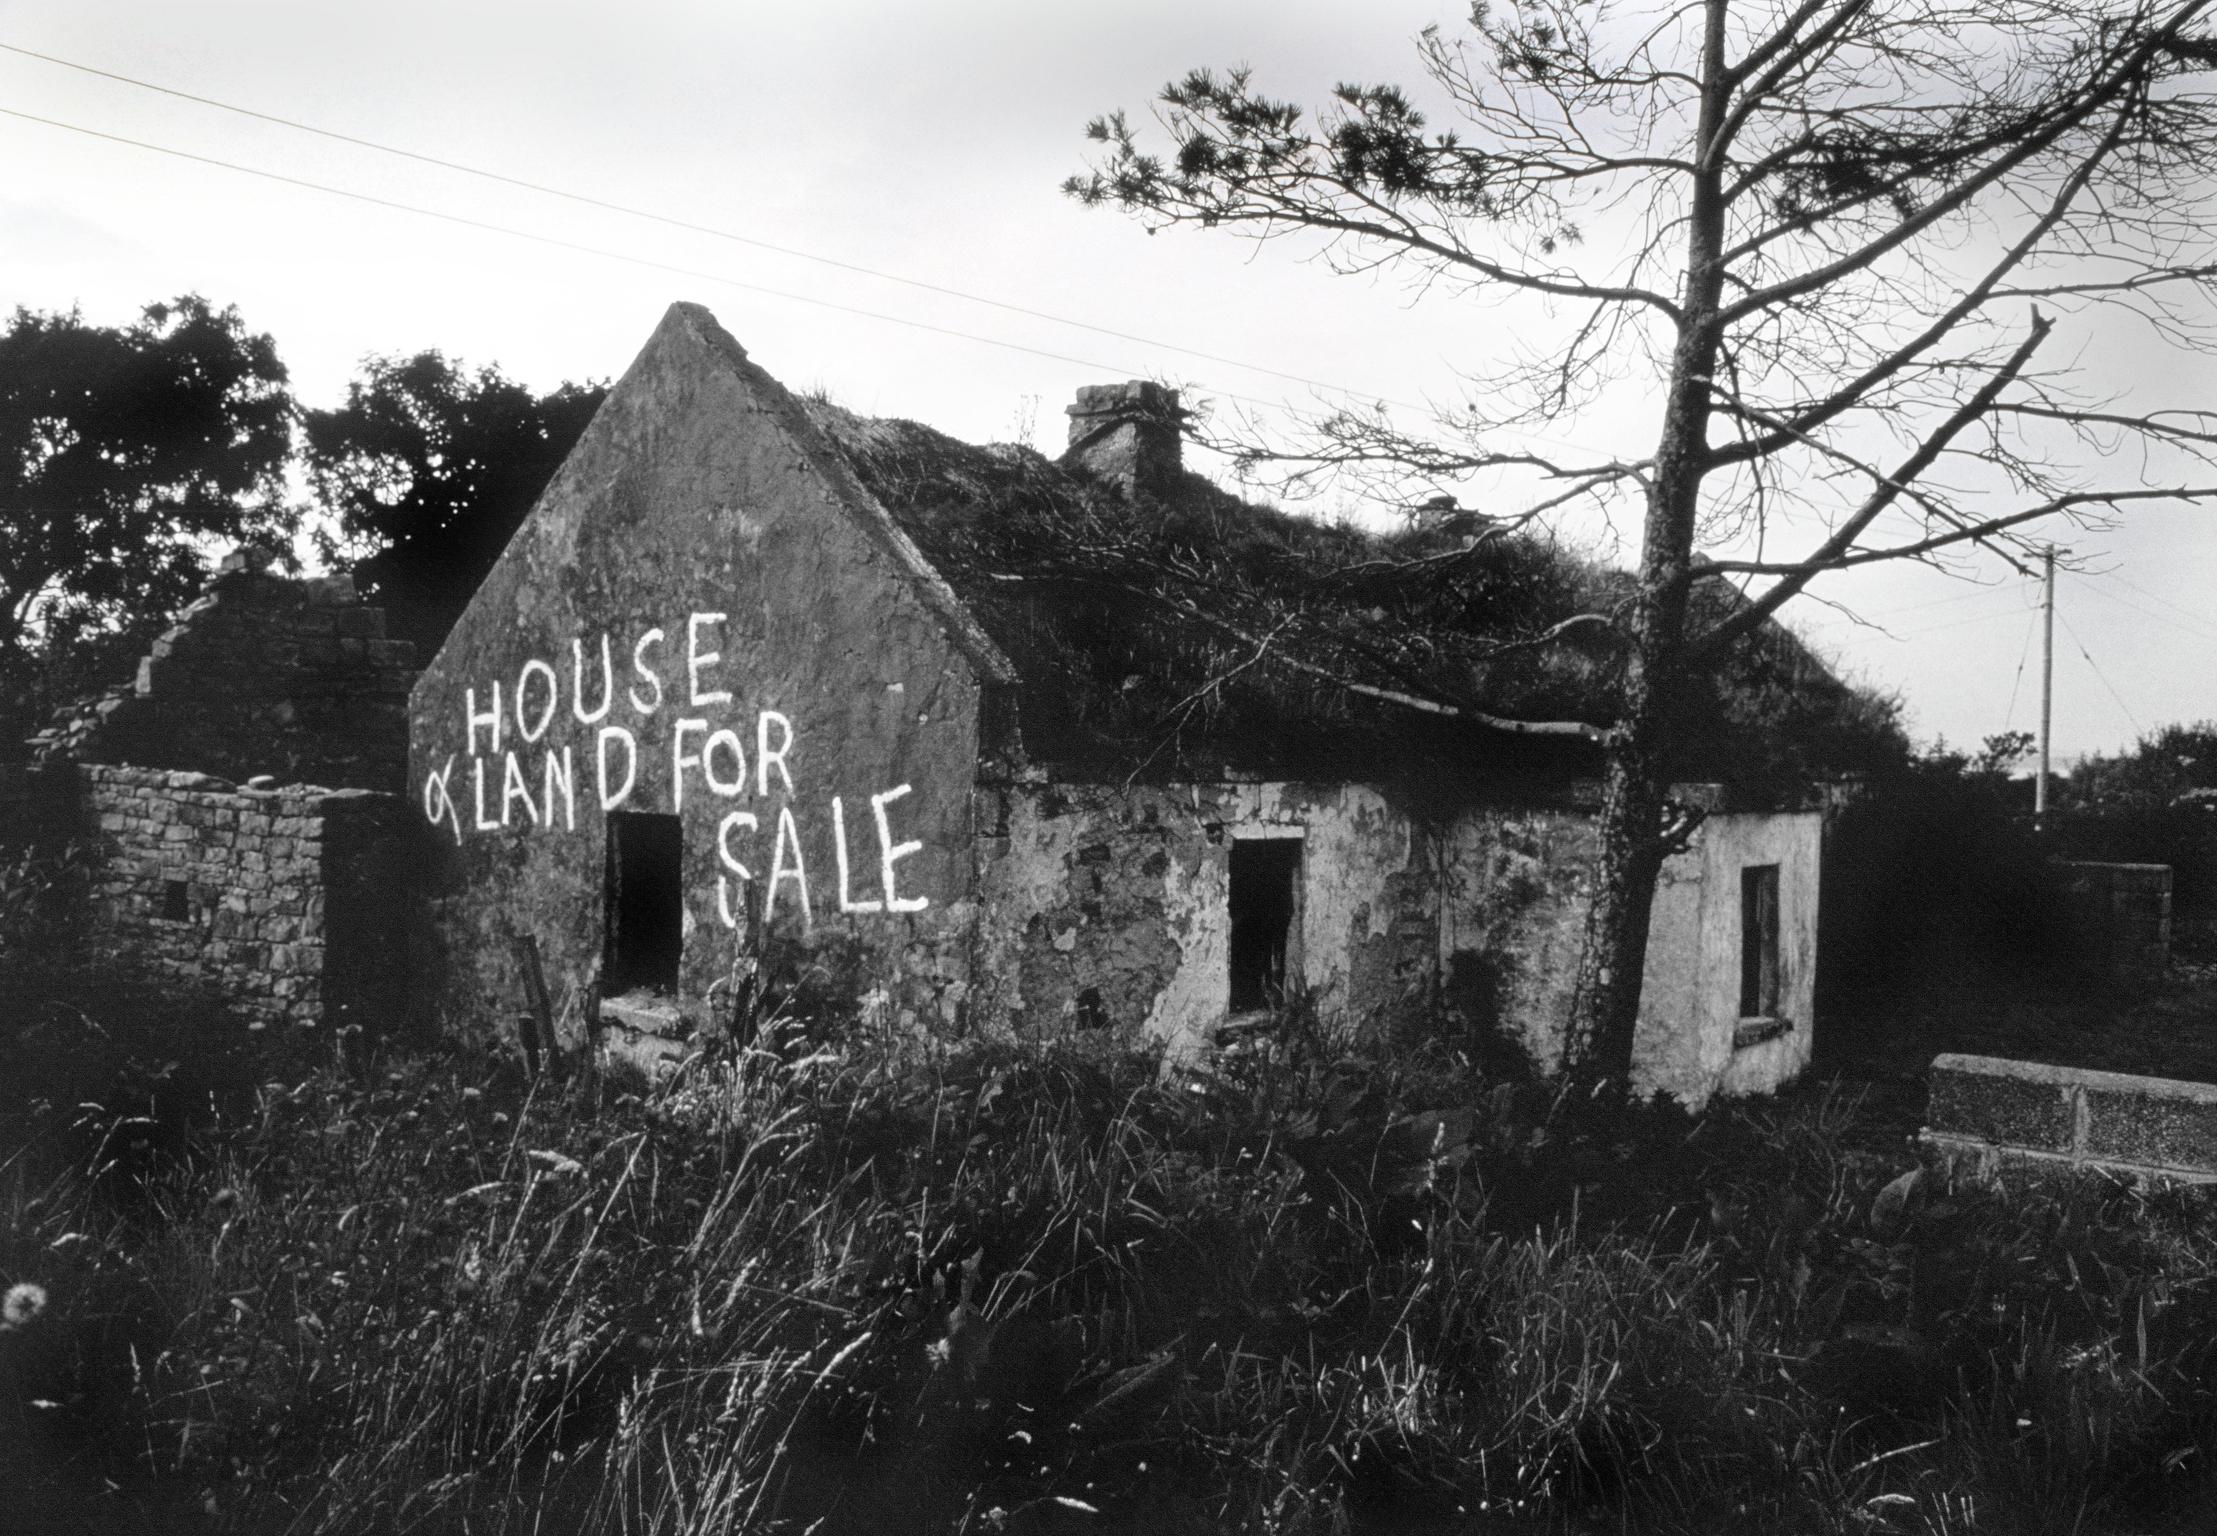 House and land for sale. Killarney. Ireland